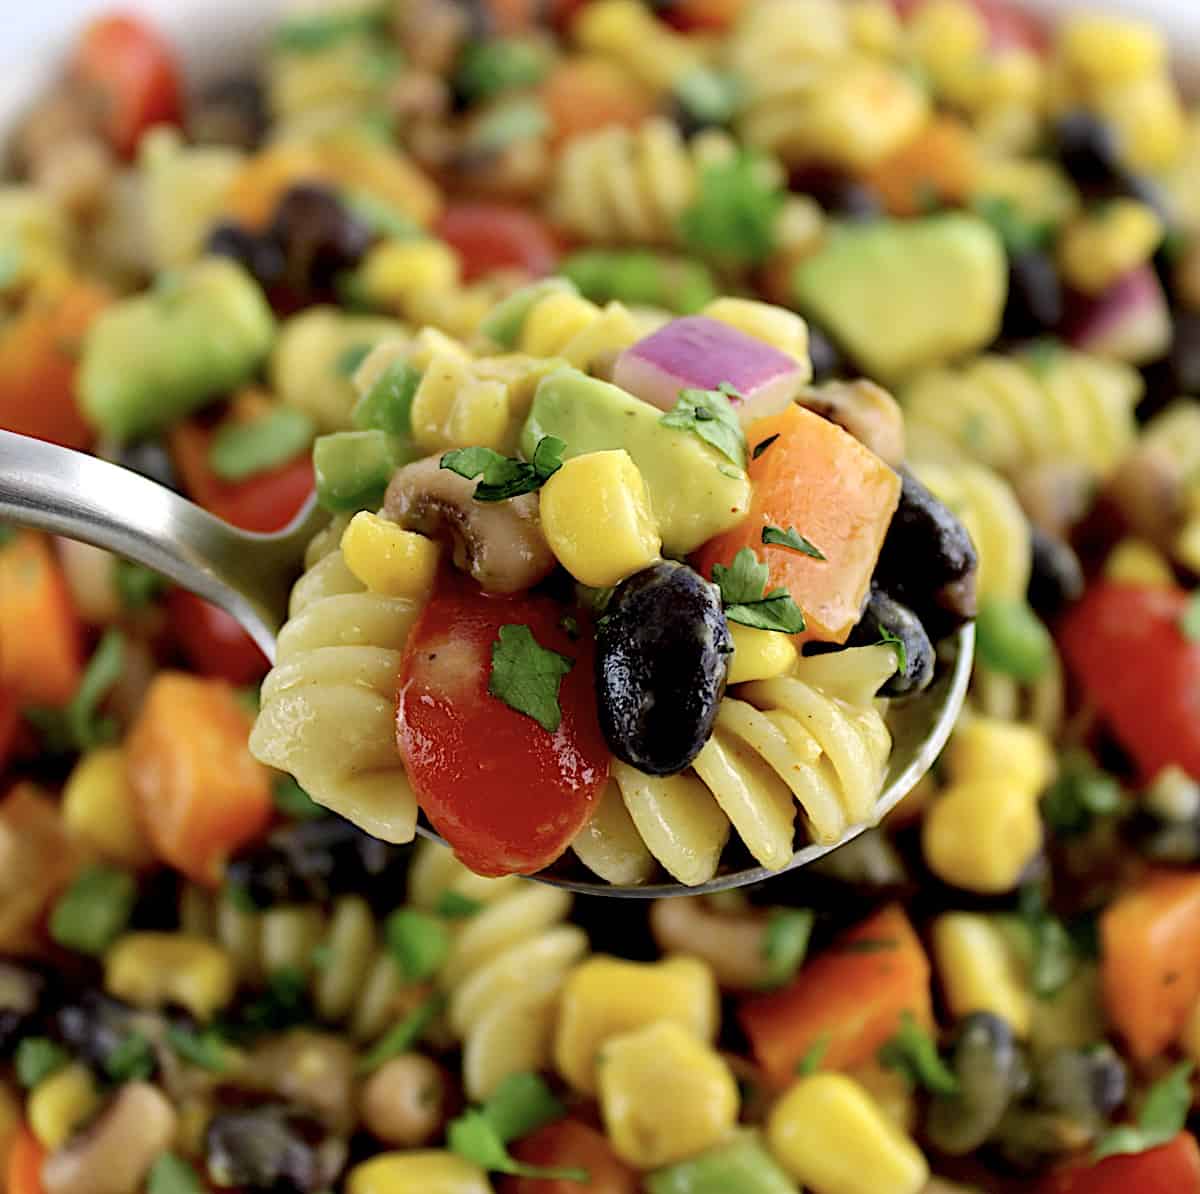 Cowboy Caviar Pasta Salad being held up with spoon